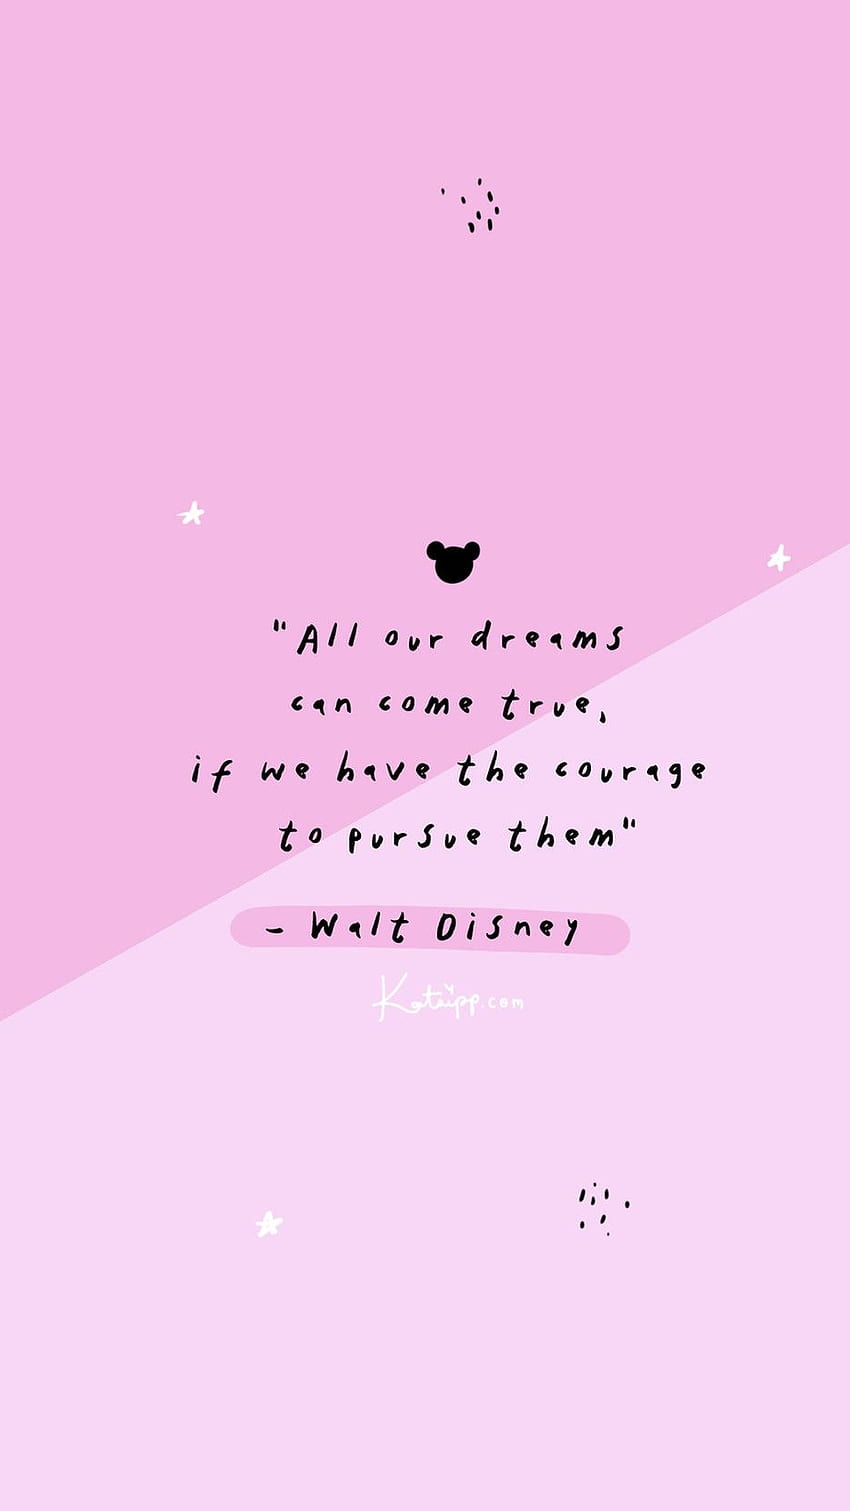 Disney Quotes Wallpaper I by echosong001 on DeviantArt